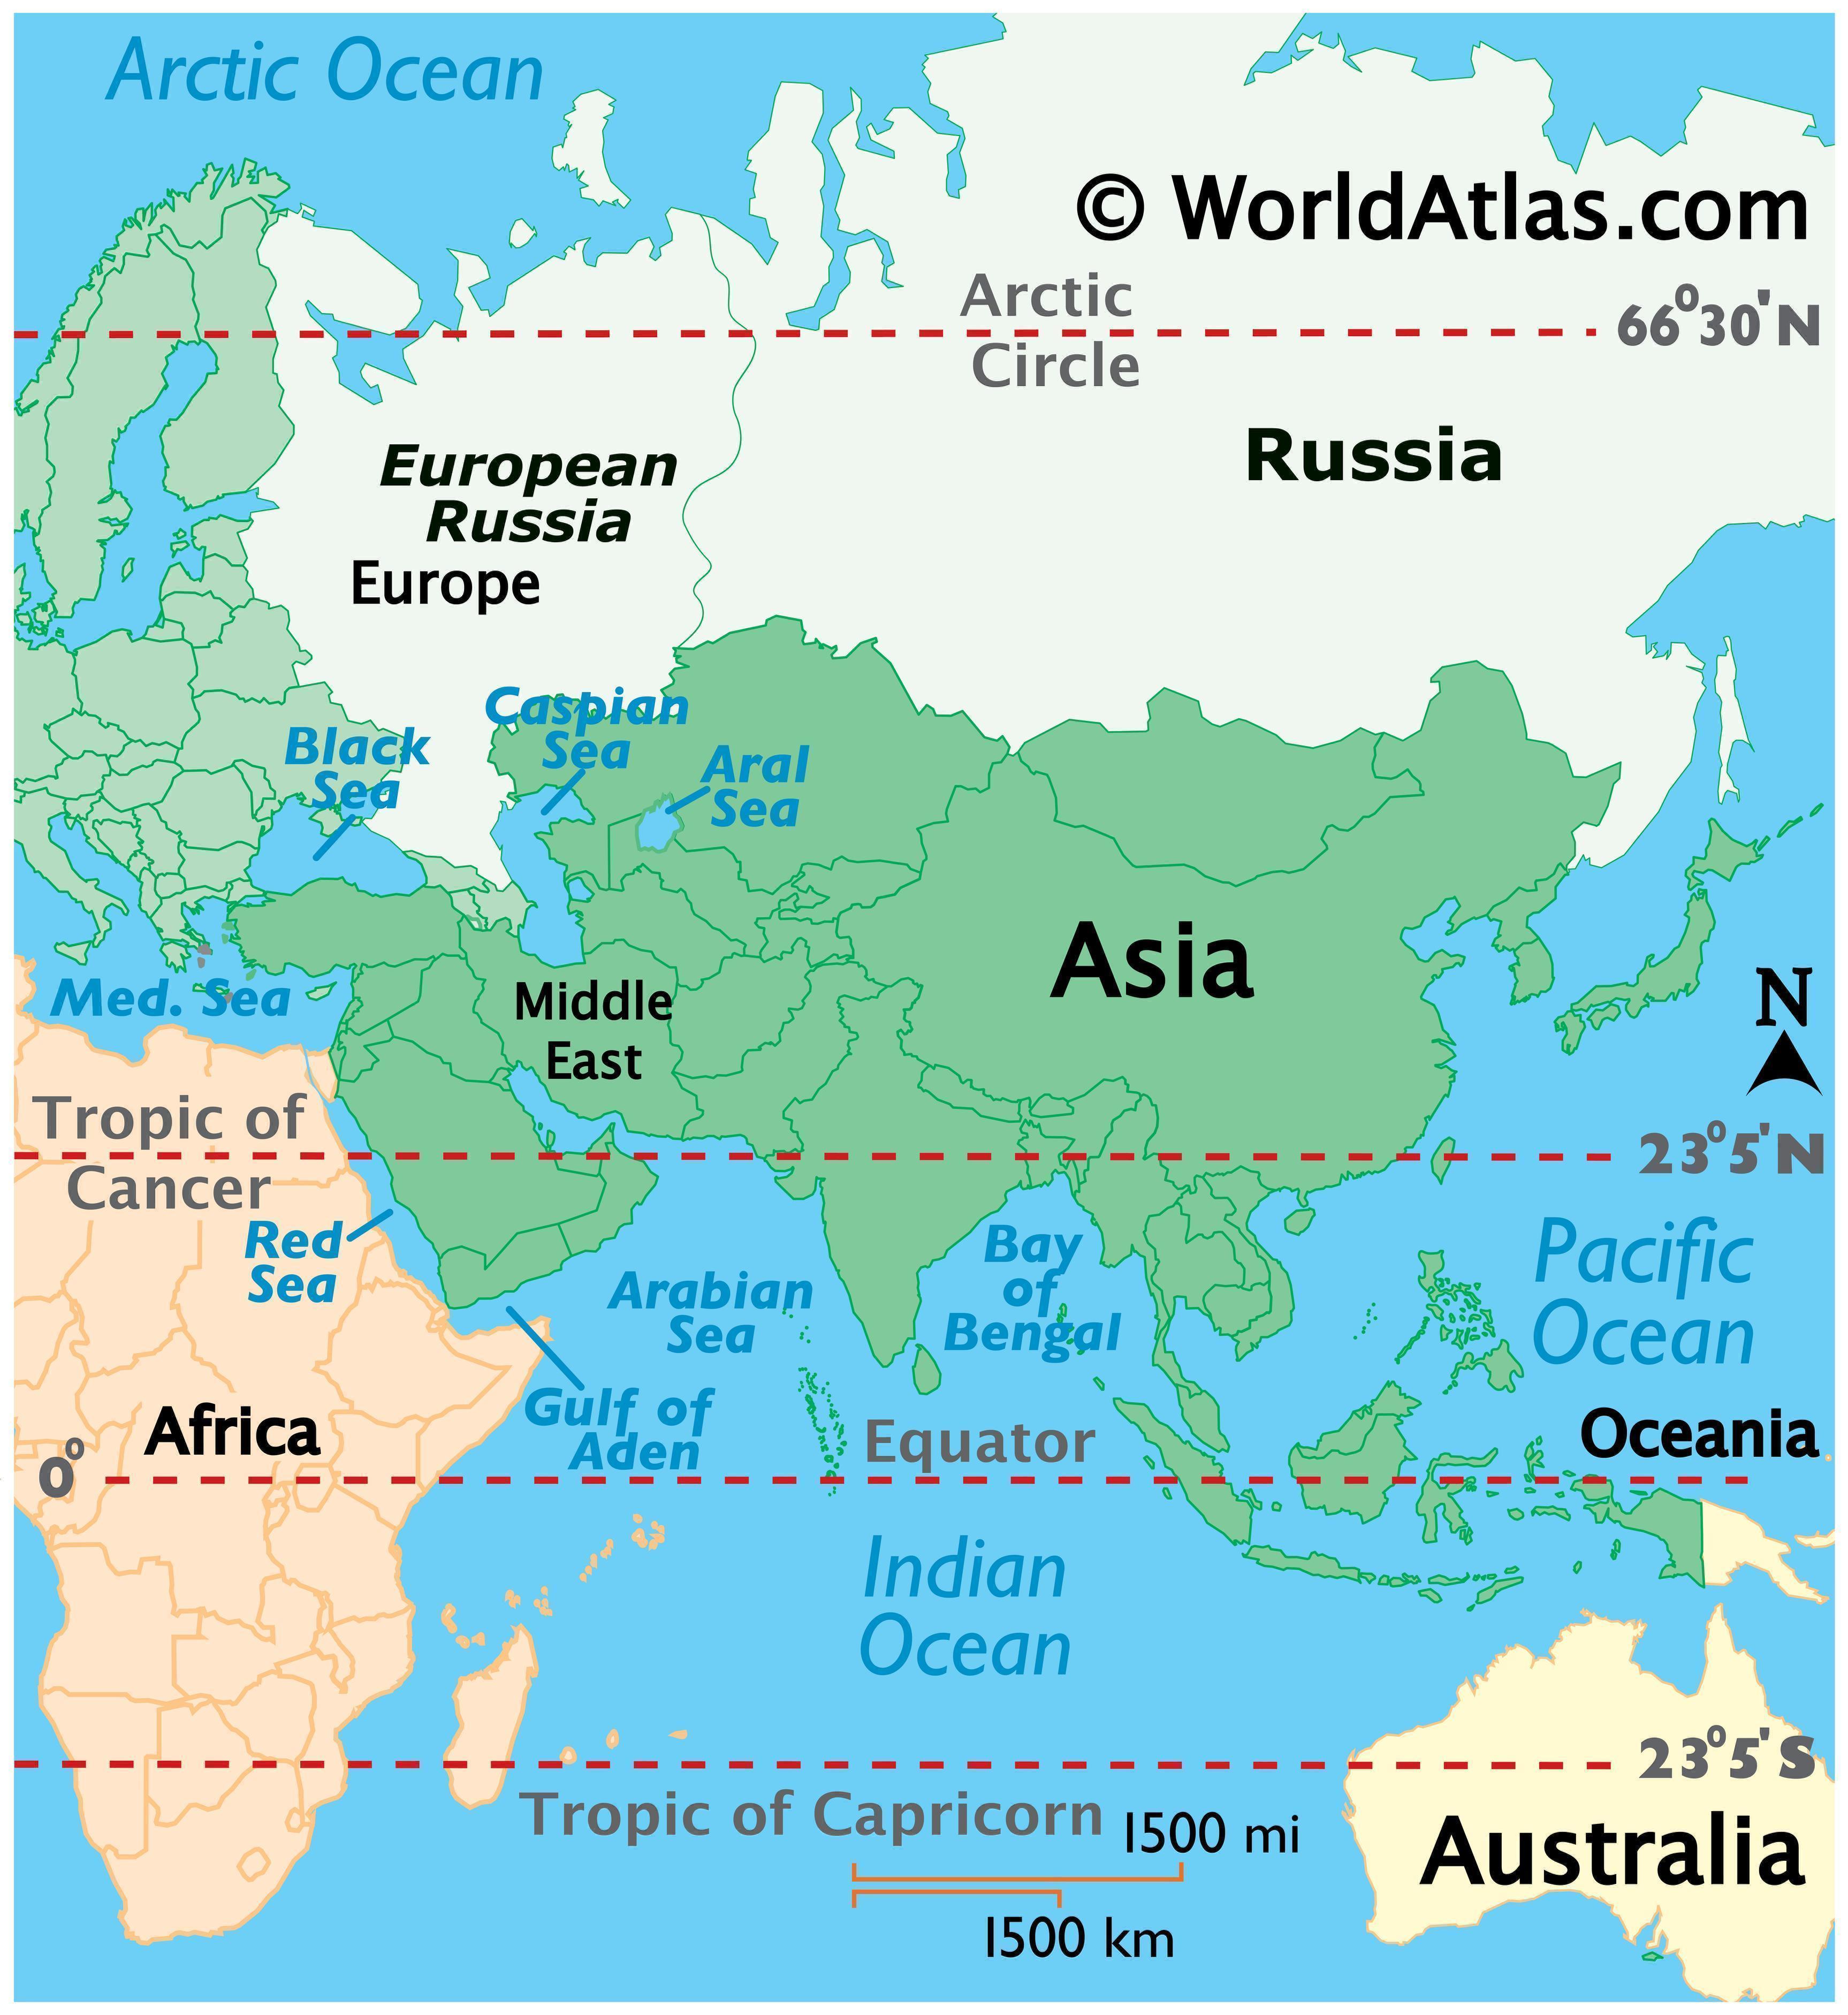 Show Me A Map Of Russia Russia Map / Geography of Russia / Map of Russia   Worldatlas.com